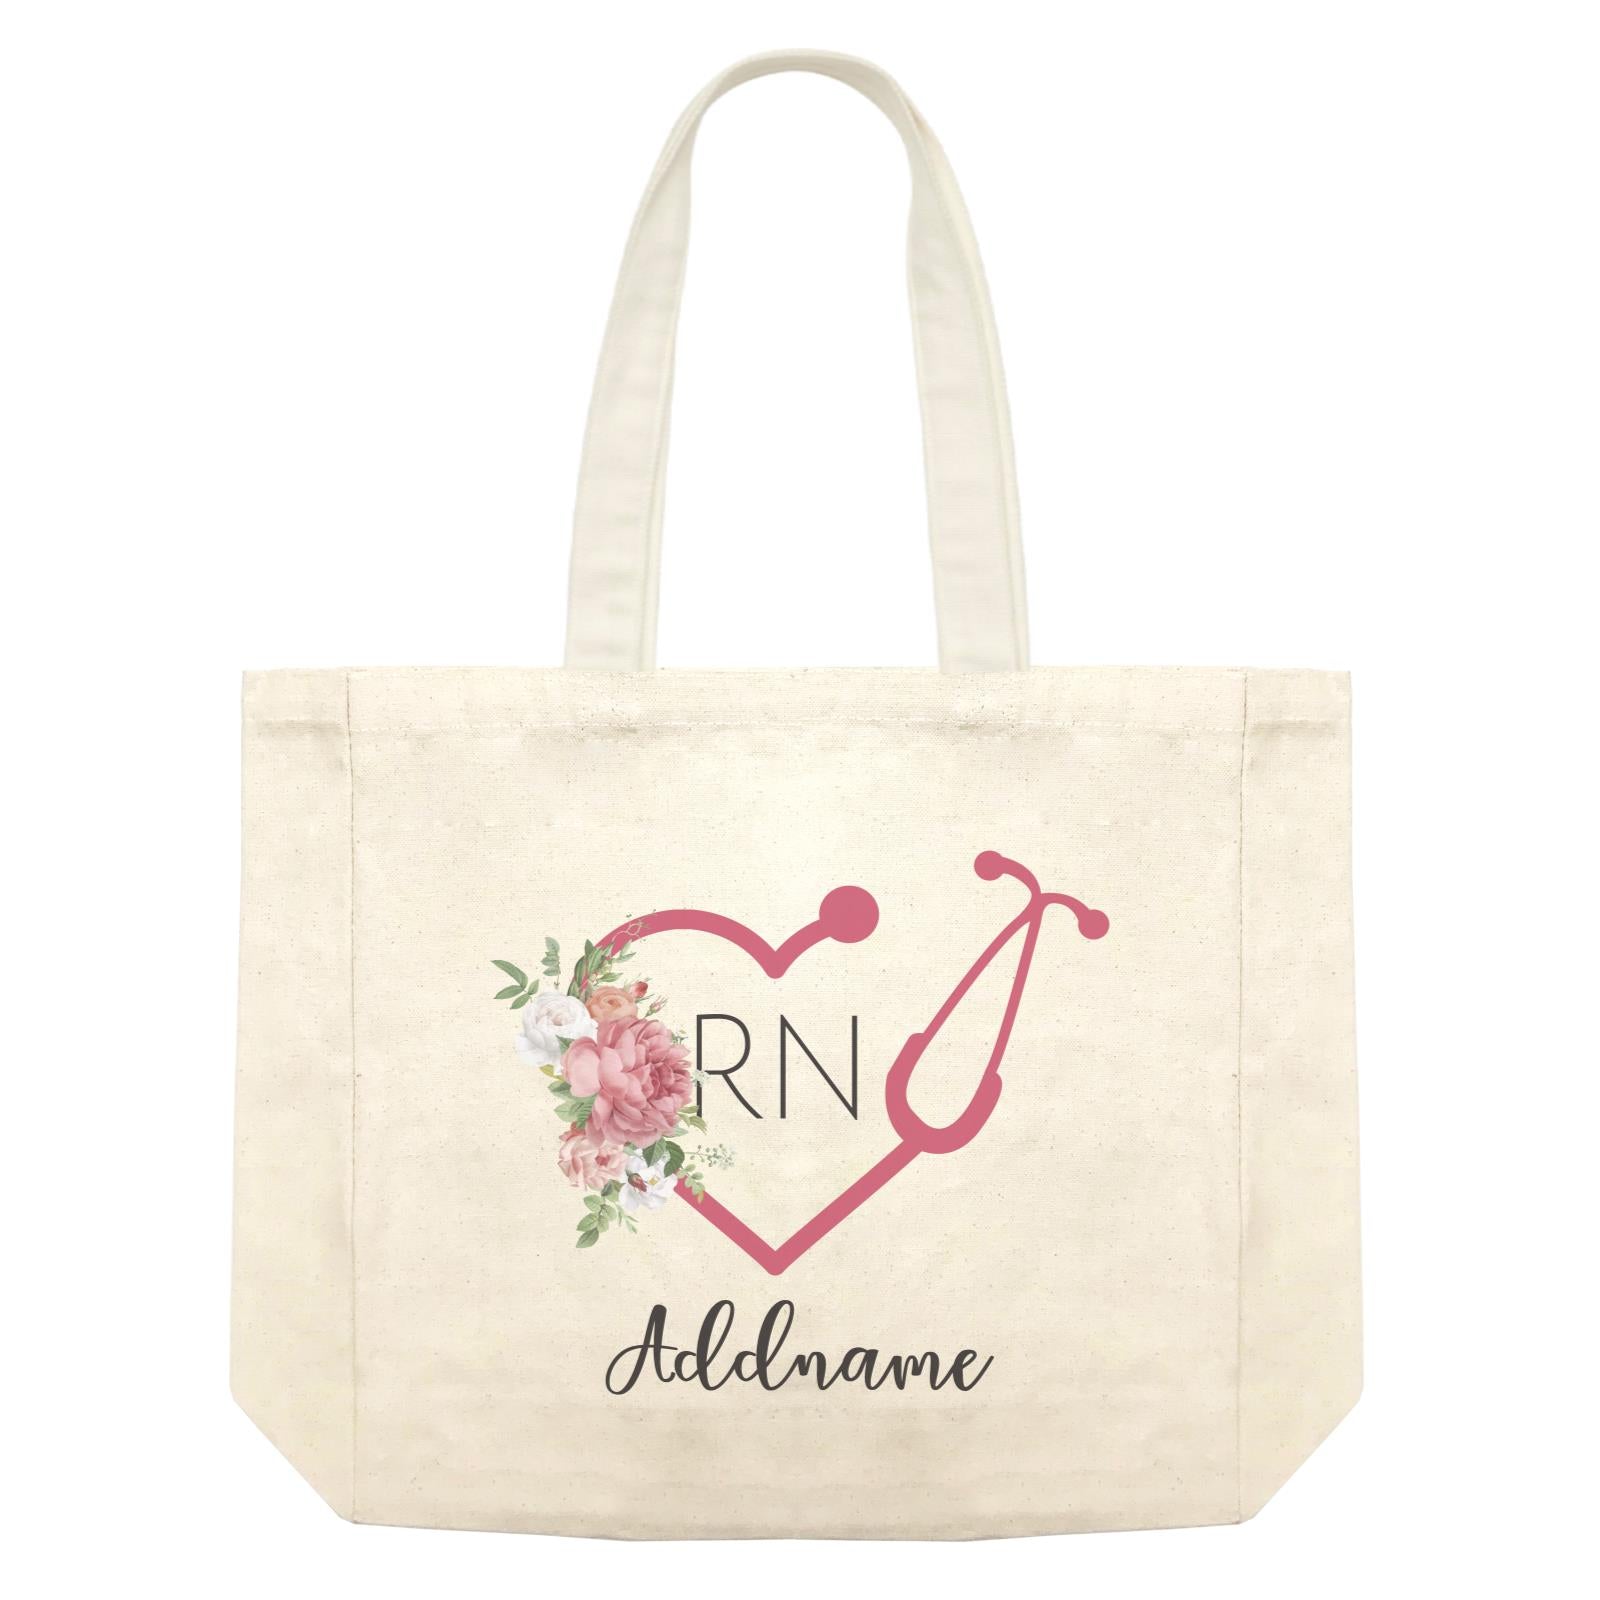 Nurse Quotes Stethoscope RN With Love Shape Addname Shopping Bag